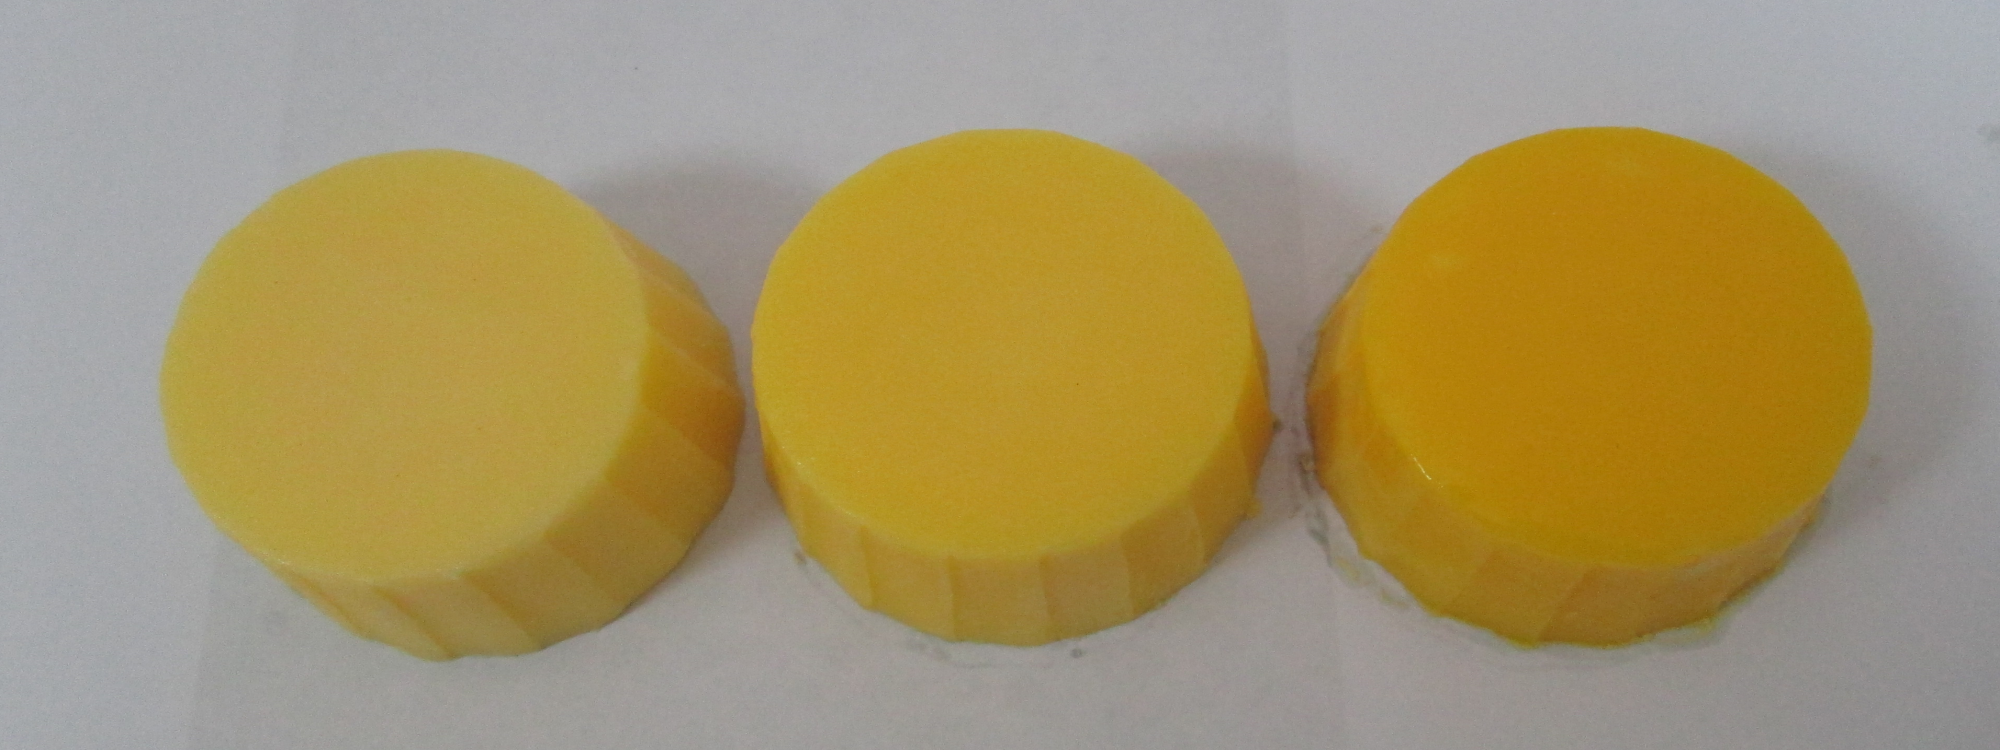 5, 10, 20 ppm in Hydrogenated Oil (from left to right)